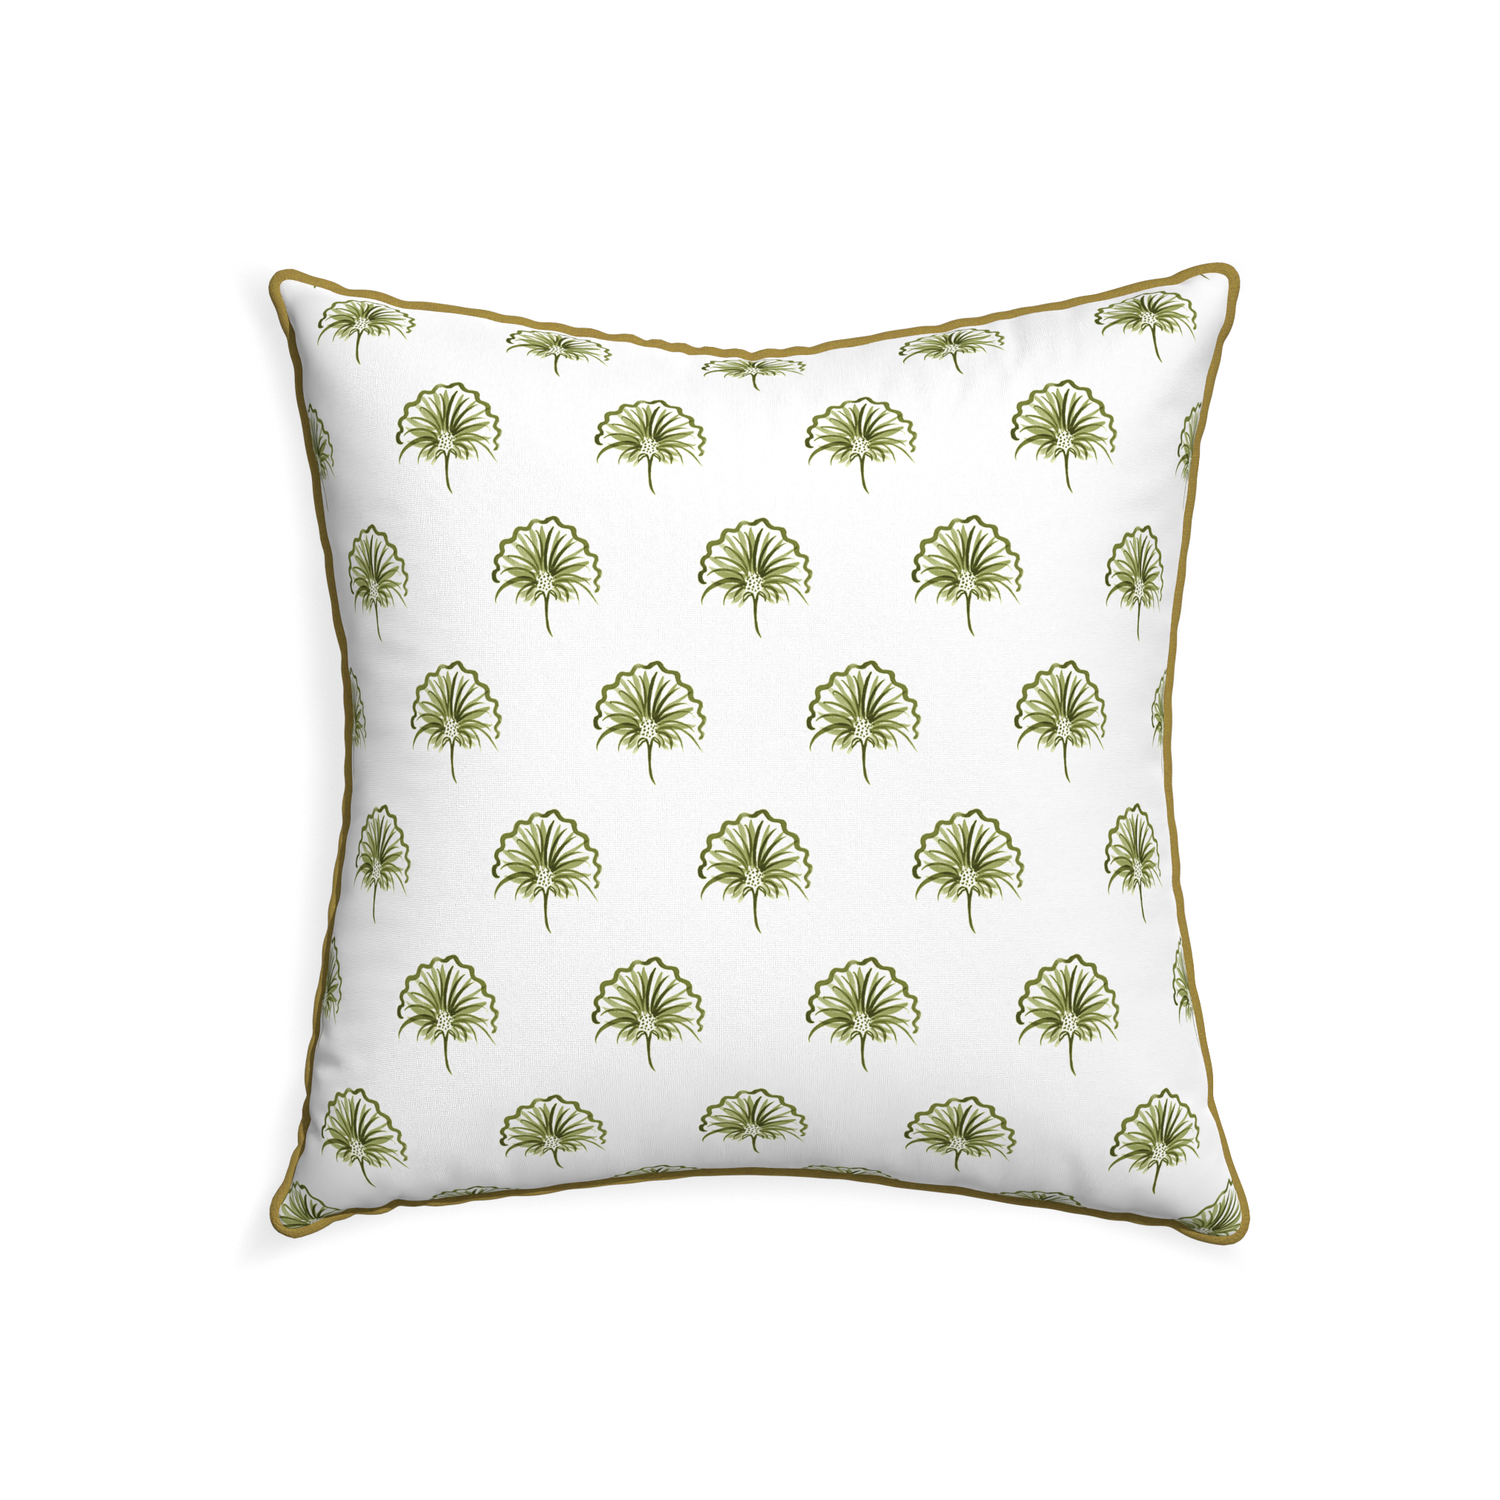 22-square penelope moss custom green floralpillow with c piping on white background